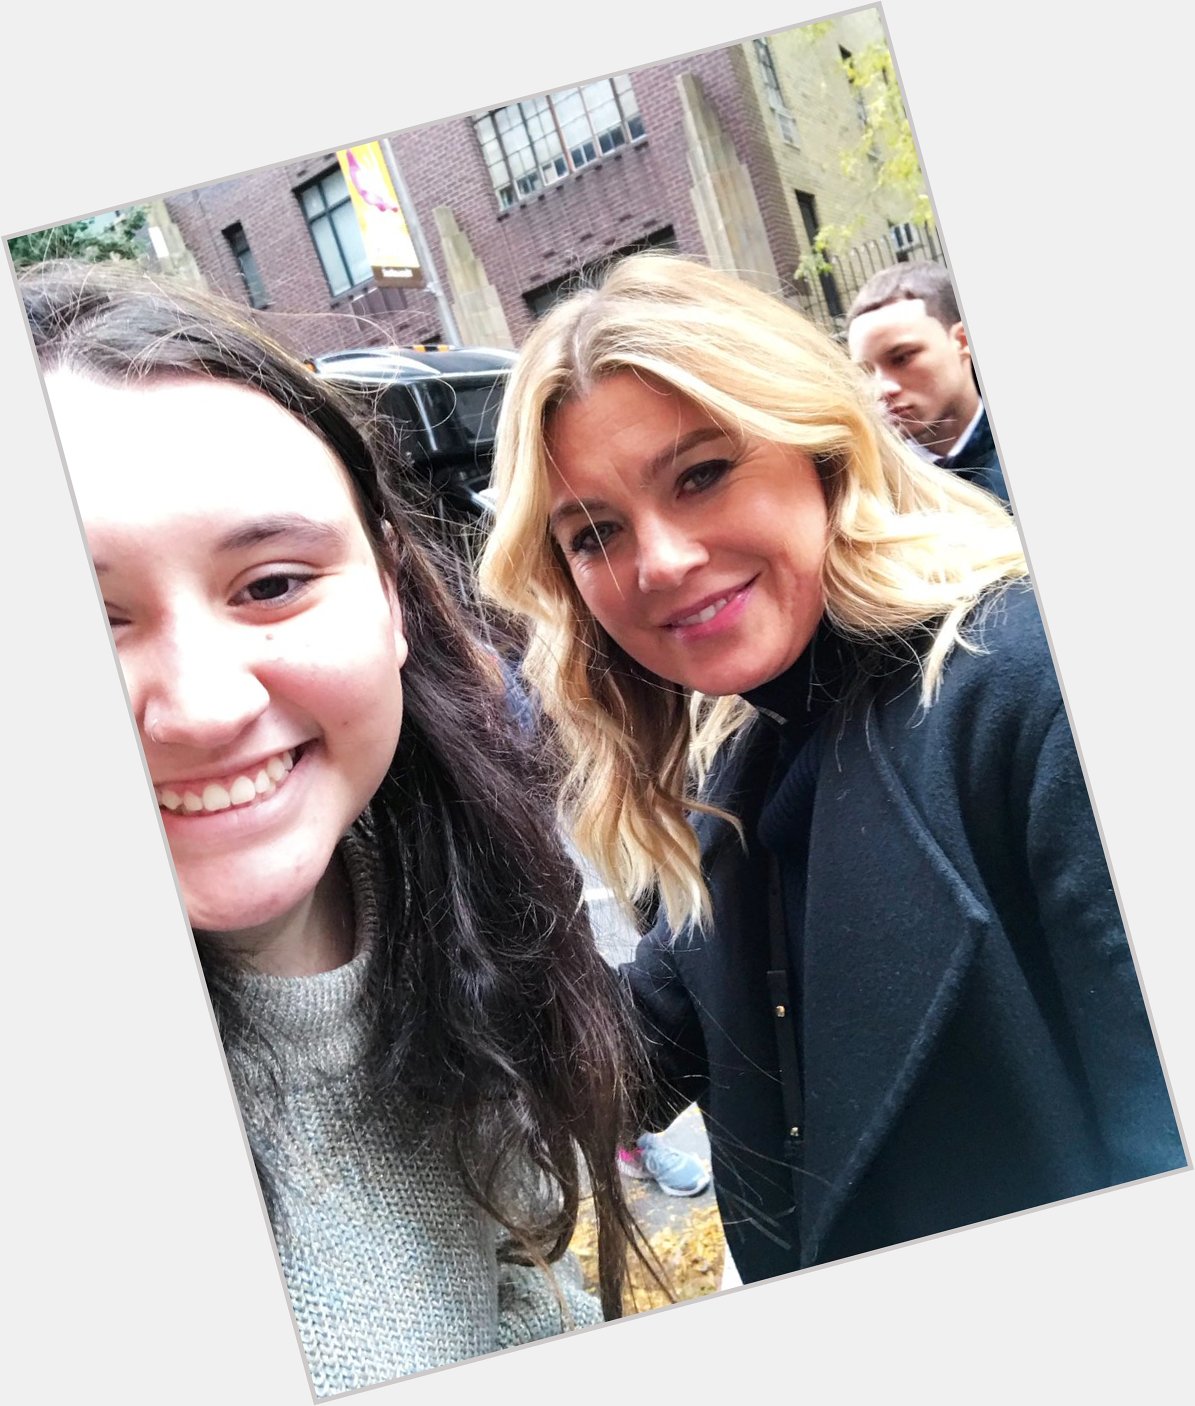 HAPPY BIRTHDAY ELLEN POMPEO!! I had the honor to wish her a happy birthday in person yesterday 